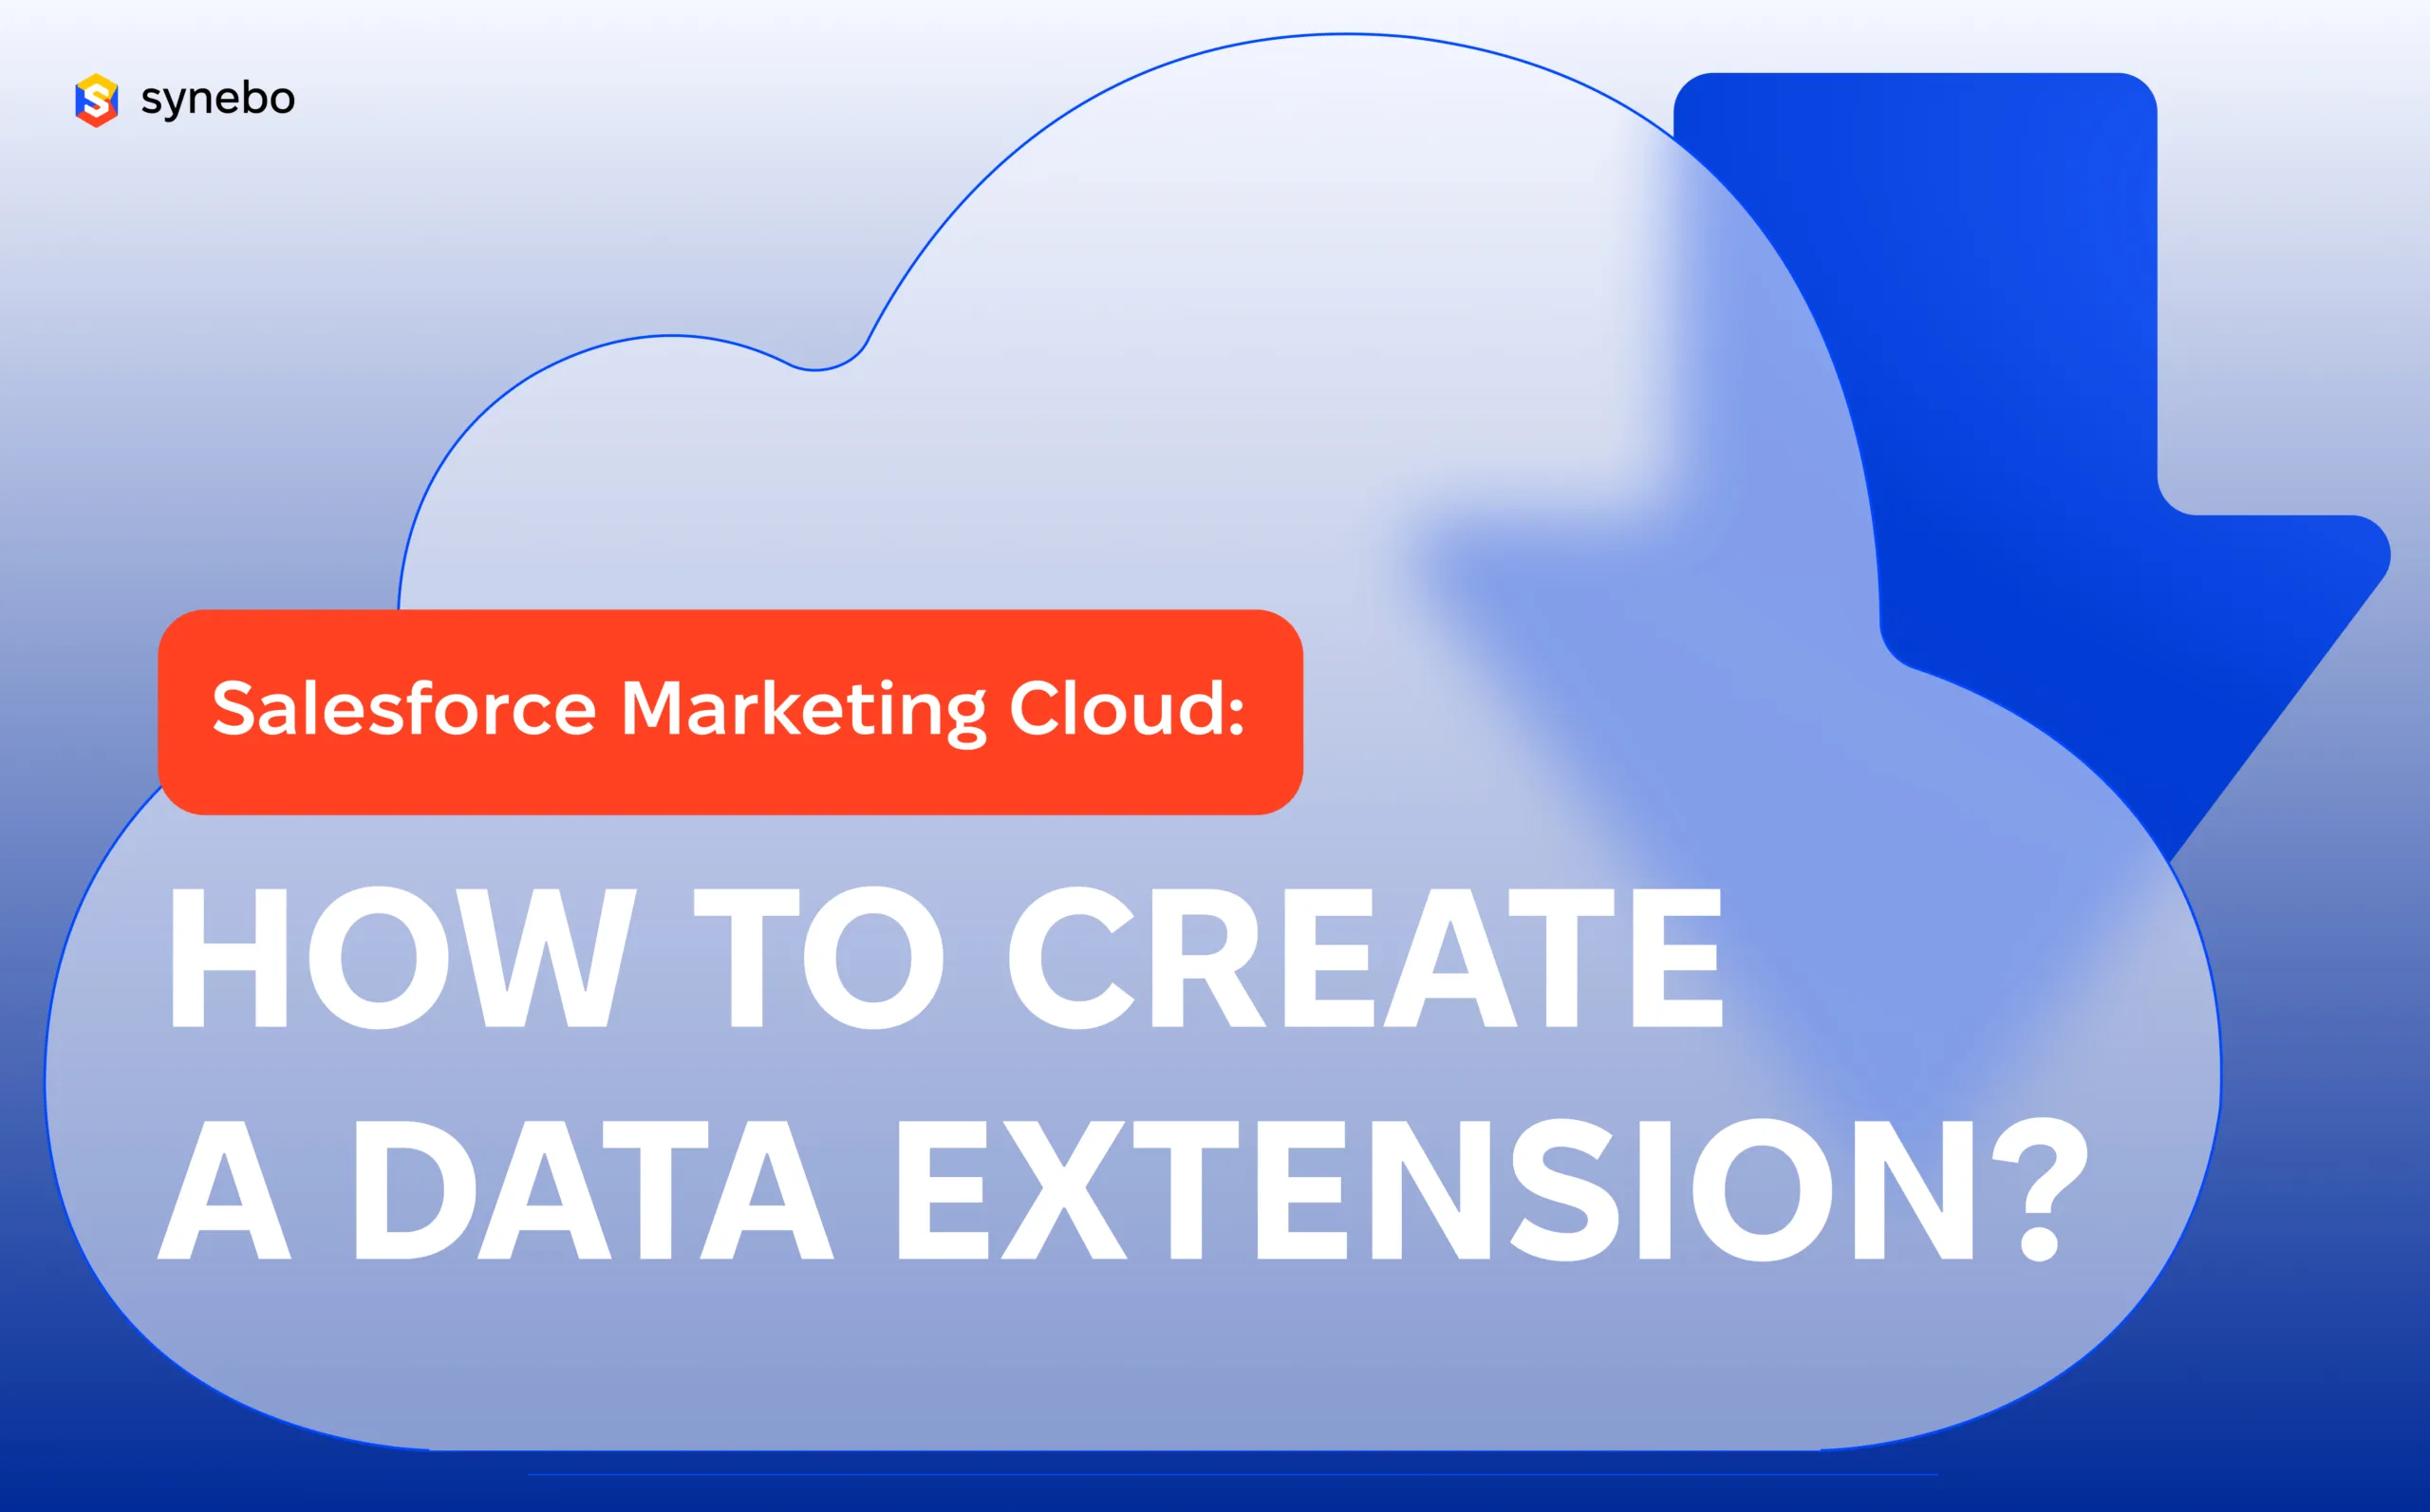 How to create data extension in marketing cloud